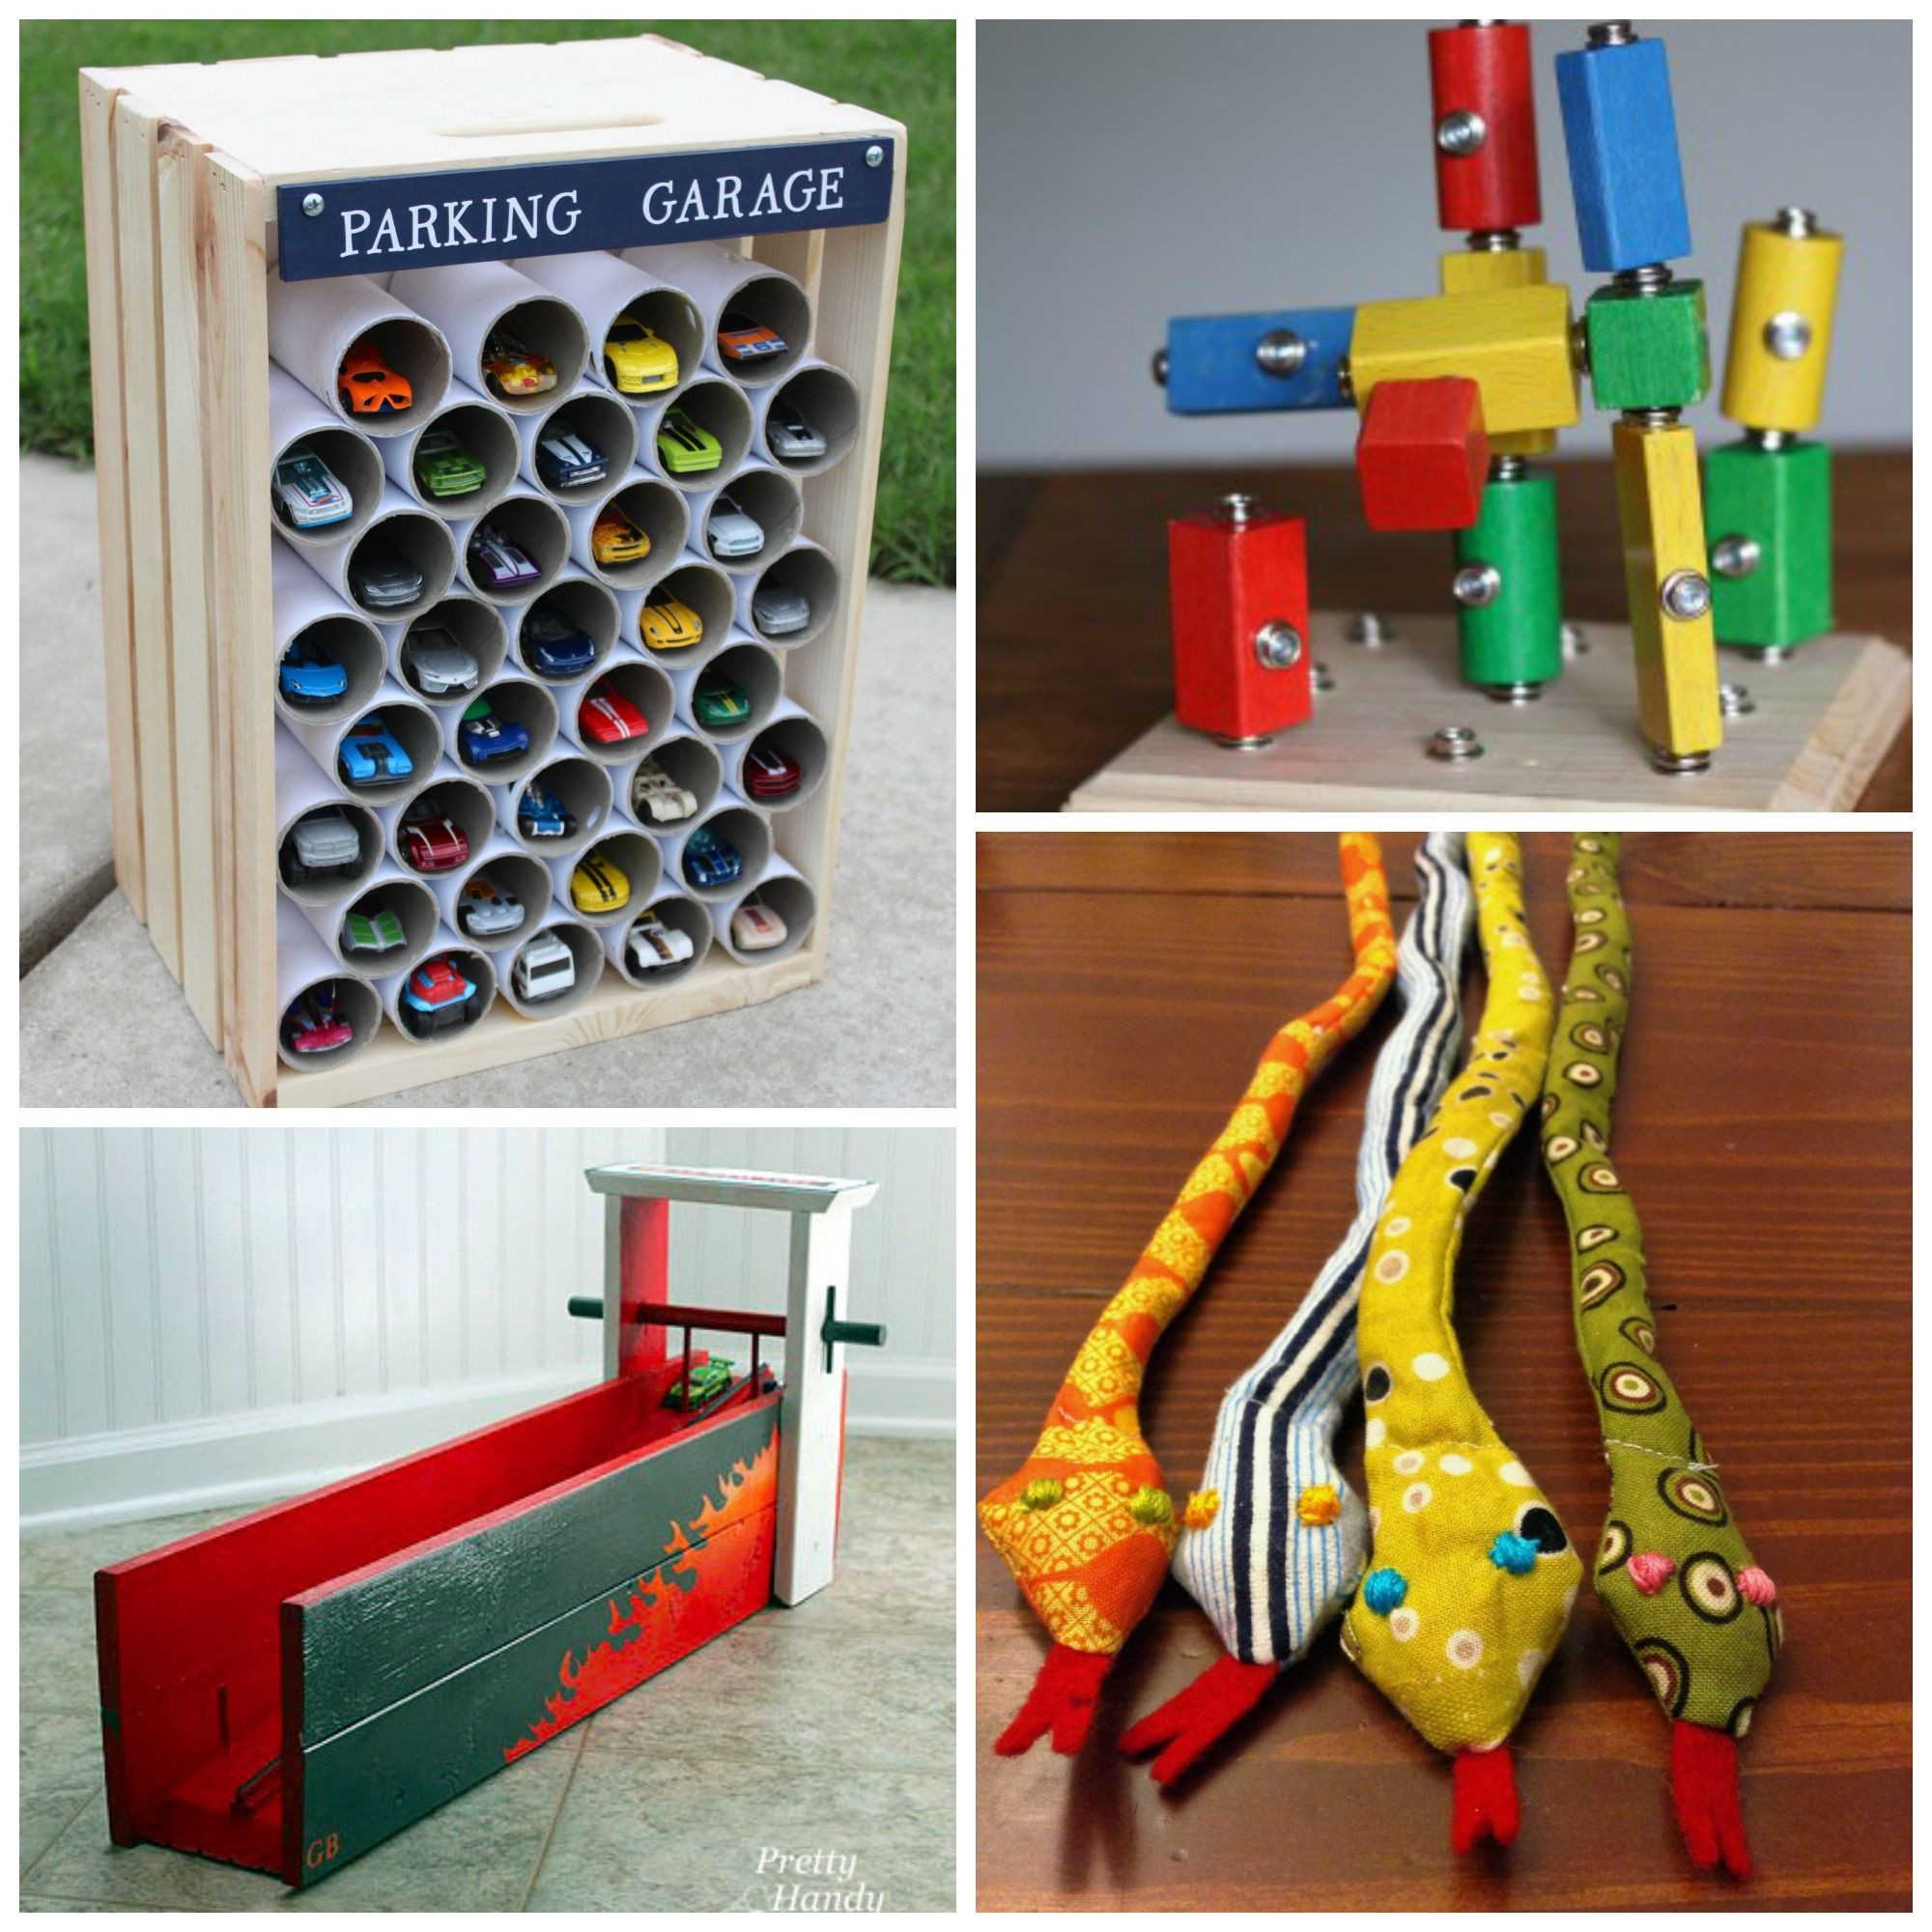 Homemade Gift Ideas For Boys
 25 More Homemade Gifts to Make for Boys Frugal Fun For